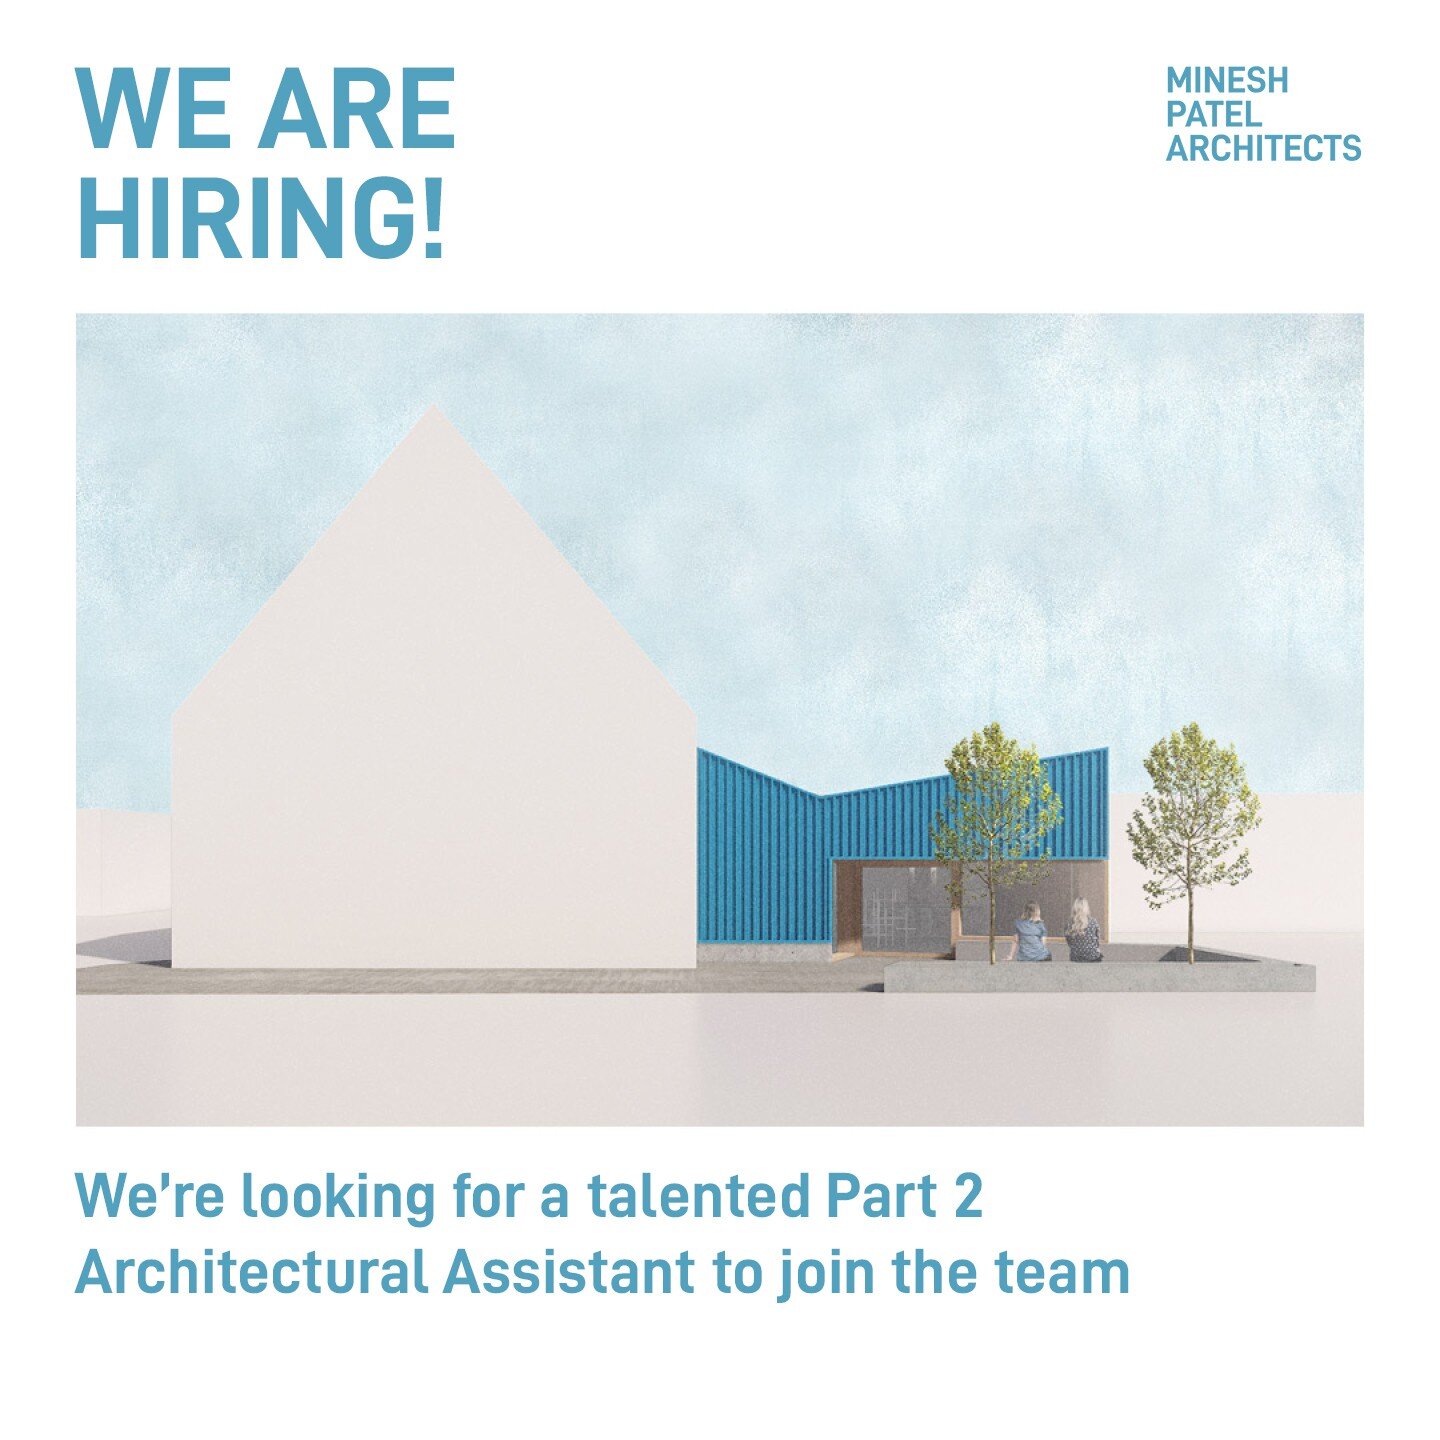 We're Hiring!

We&rsquo;re looking to recruit a talented West Midlands based Part 2 Architectural Assistant to join our ambitious studio in Birmingham. 

If you are interested, please apply by 20th May 2022. For more information, visit our website at